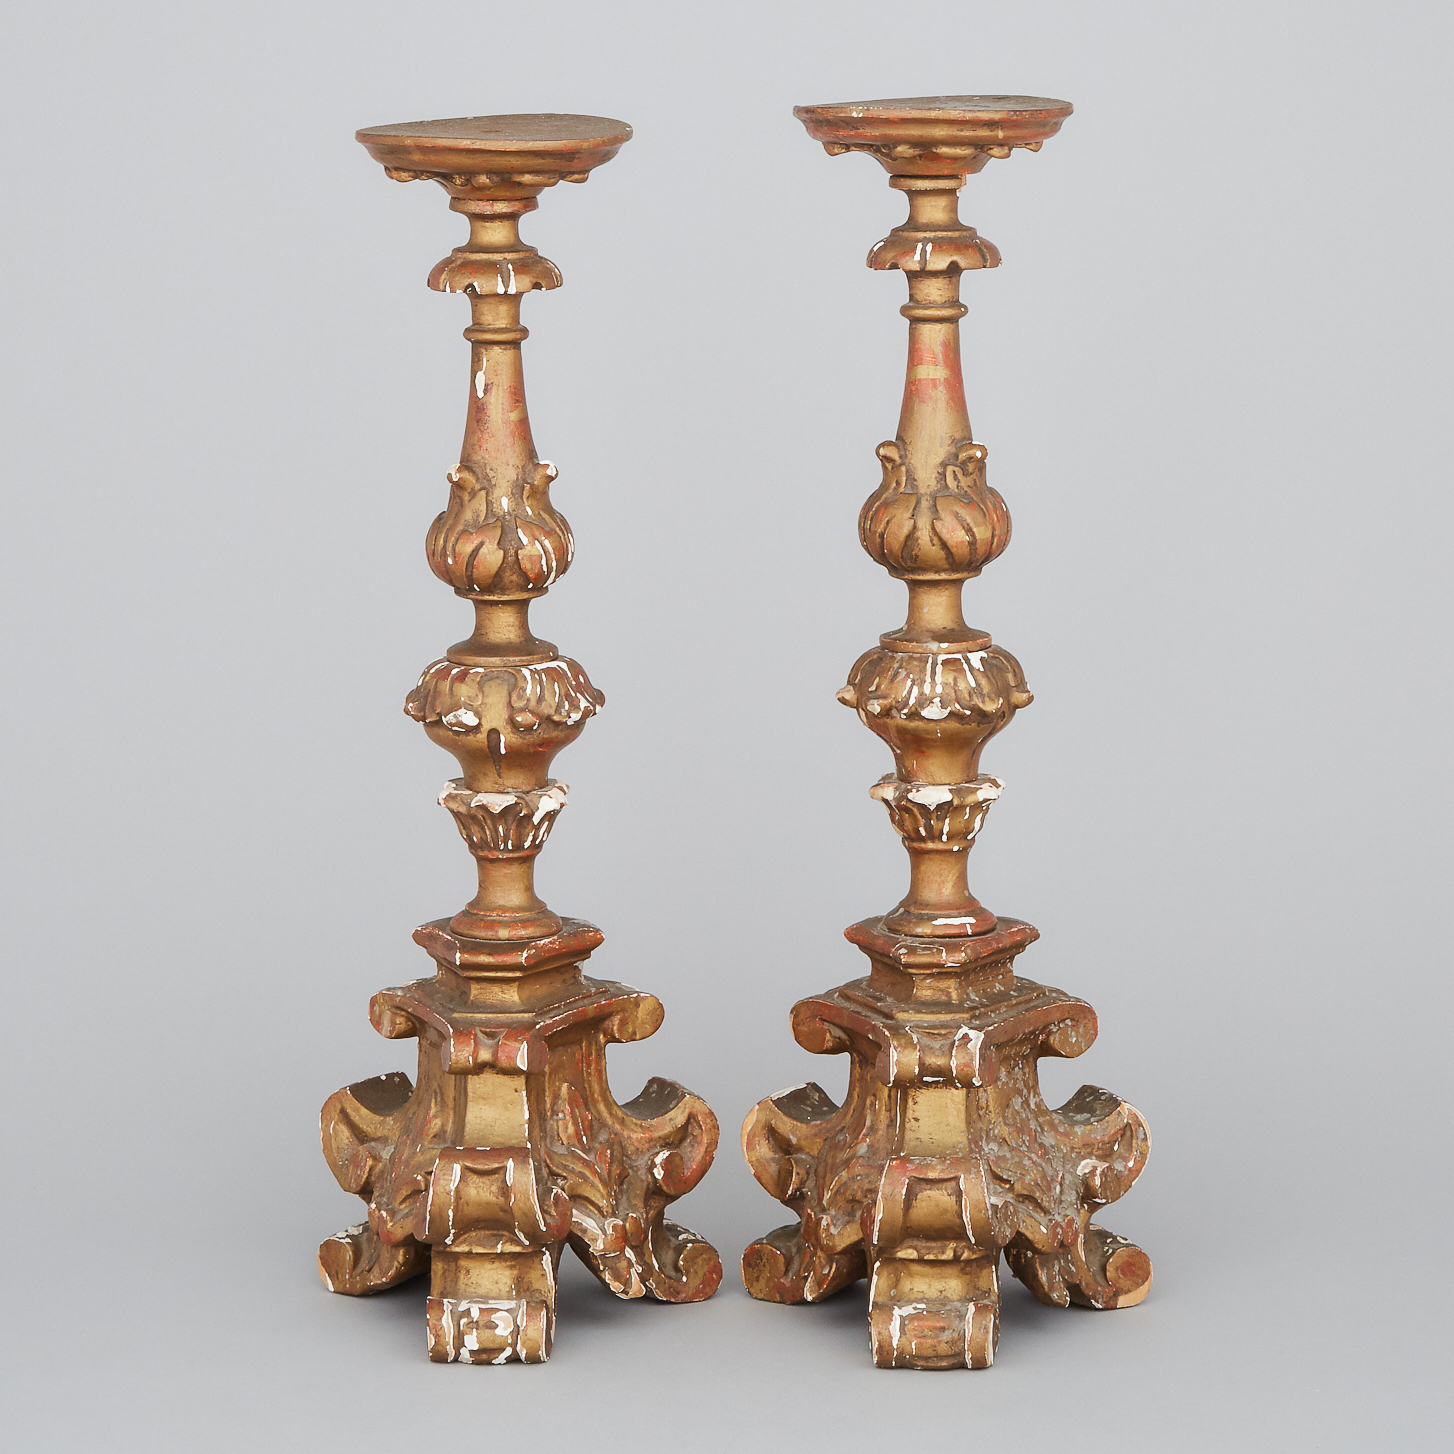 Pair of Italian Baroque Style Giltwood Candle Prickets, mid 20th century